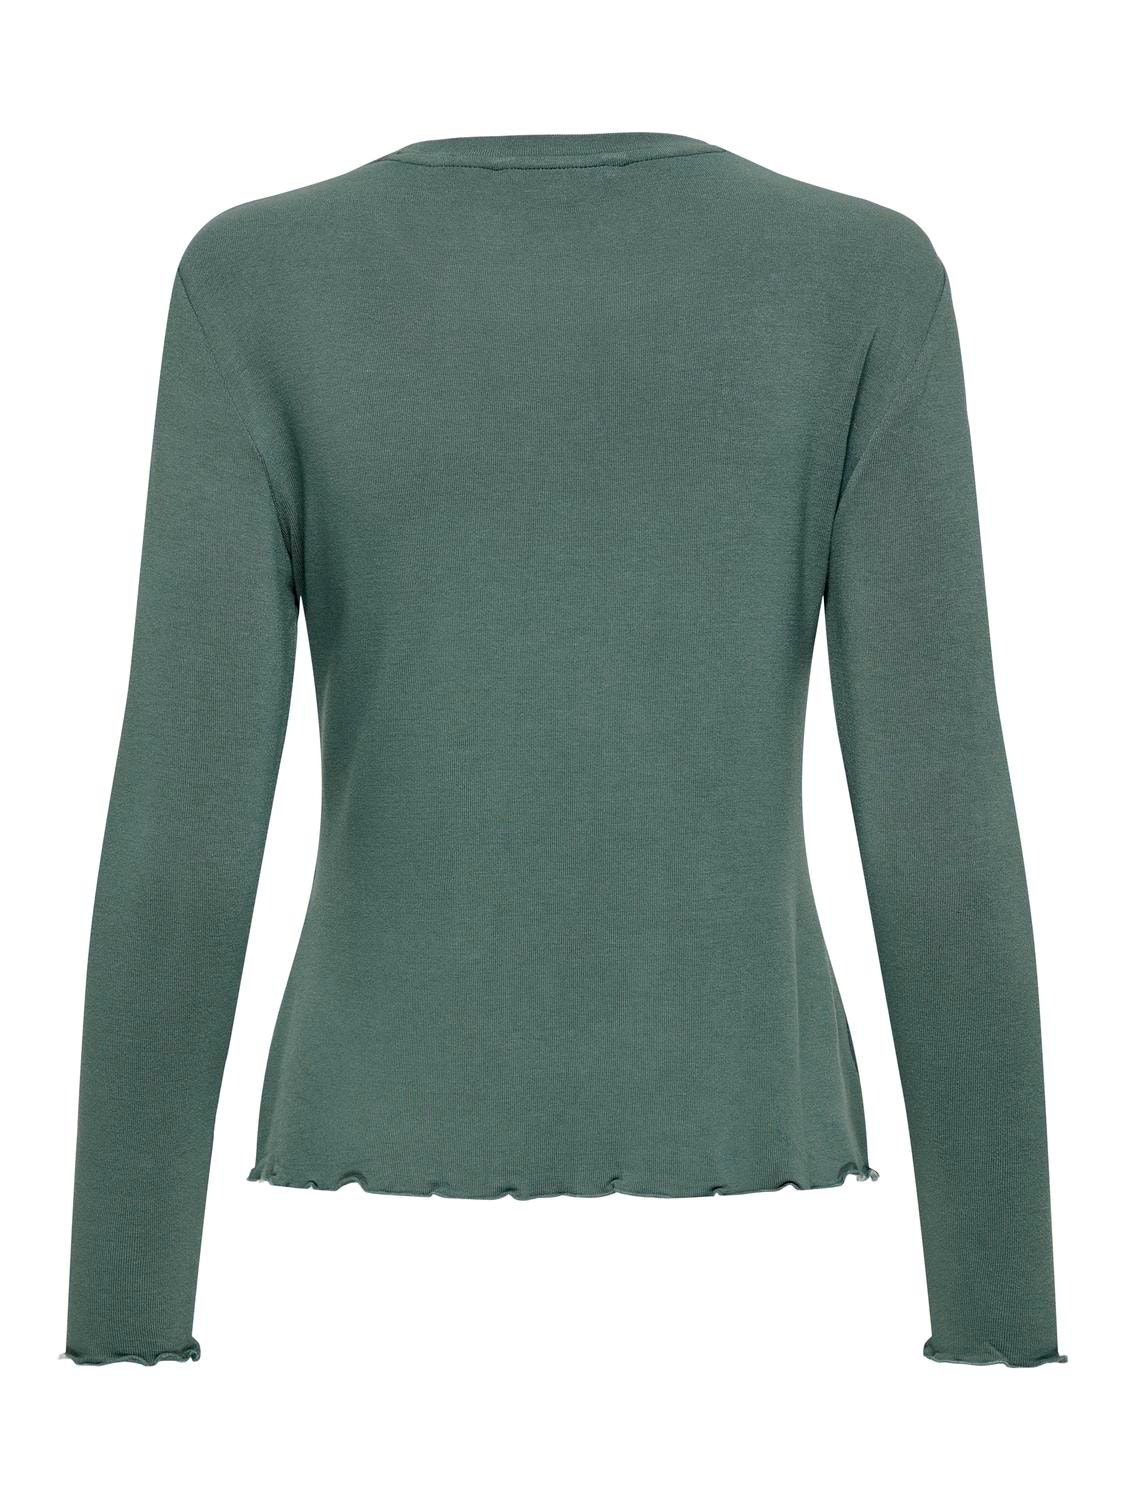 ONLY Wave edge top -Balsam Green - 15272215